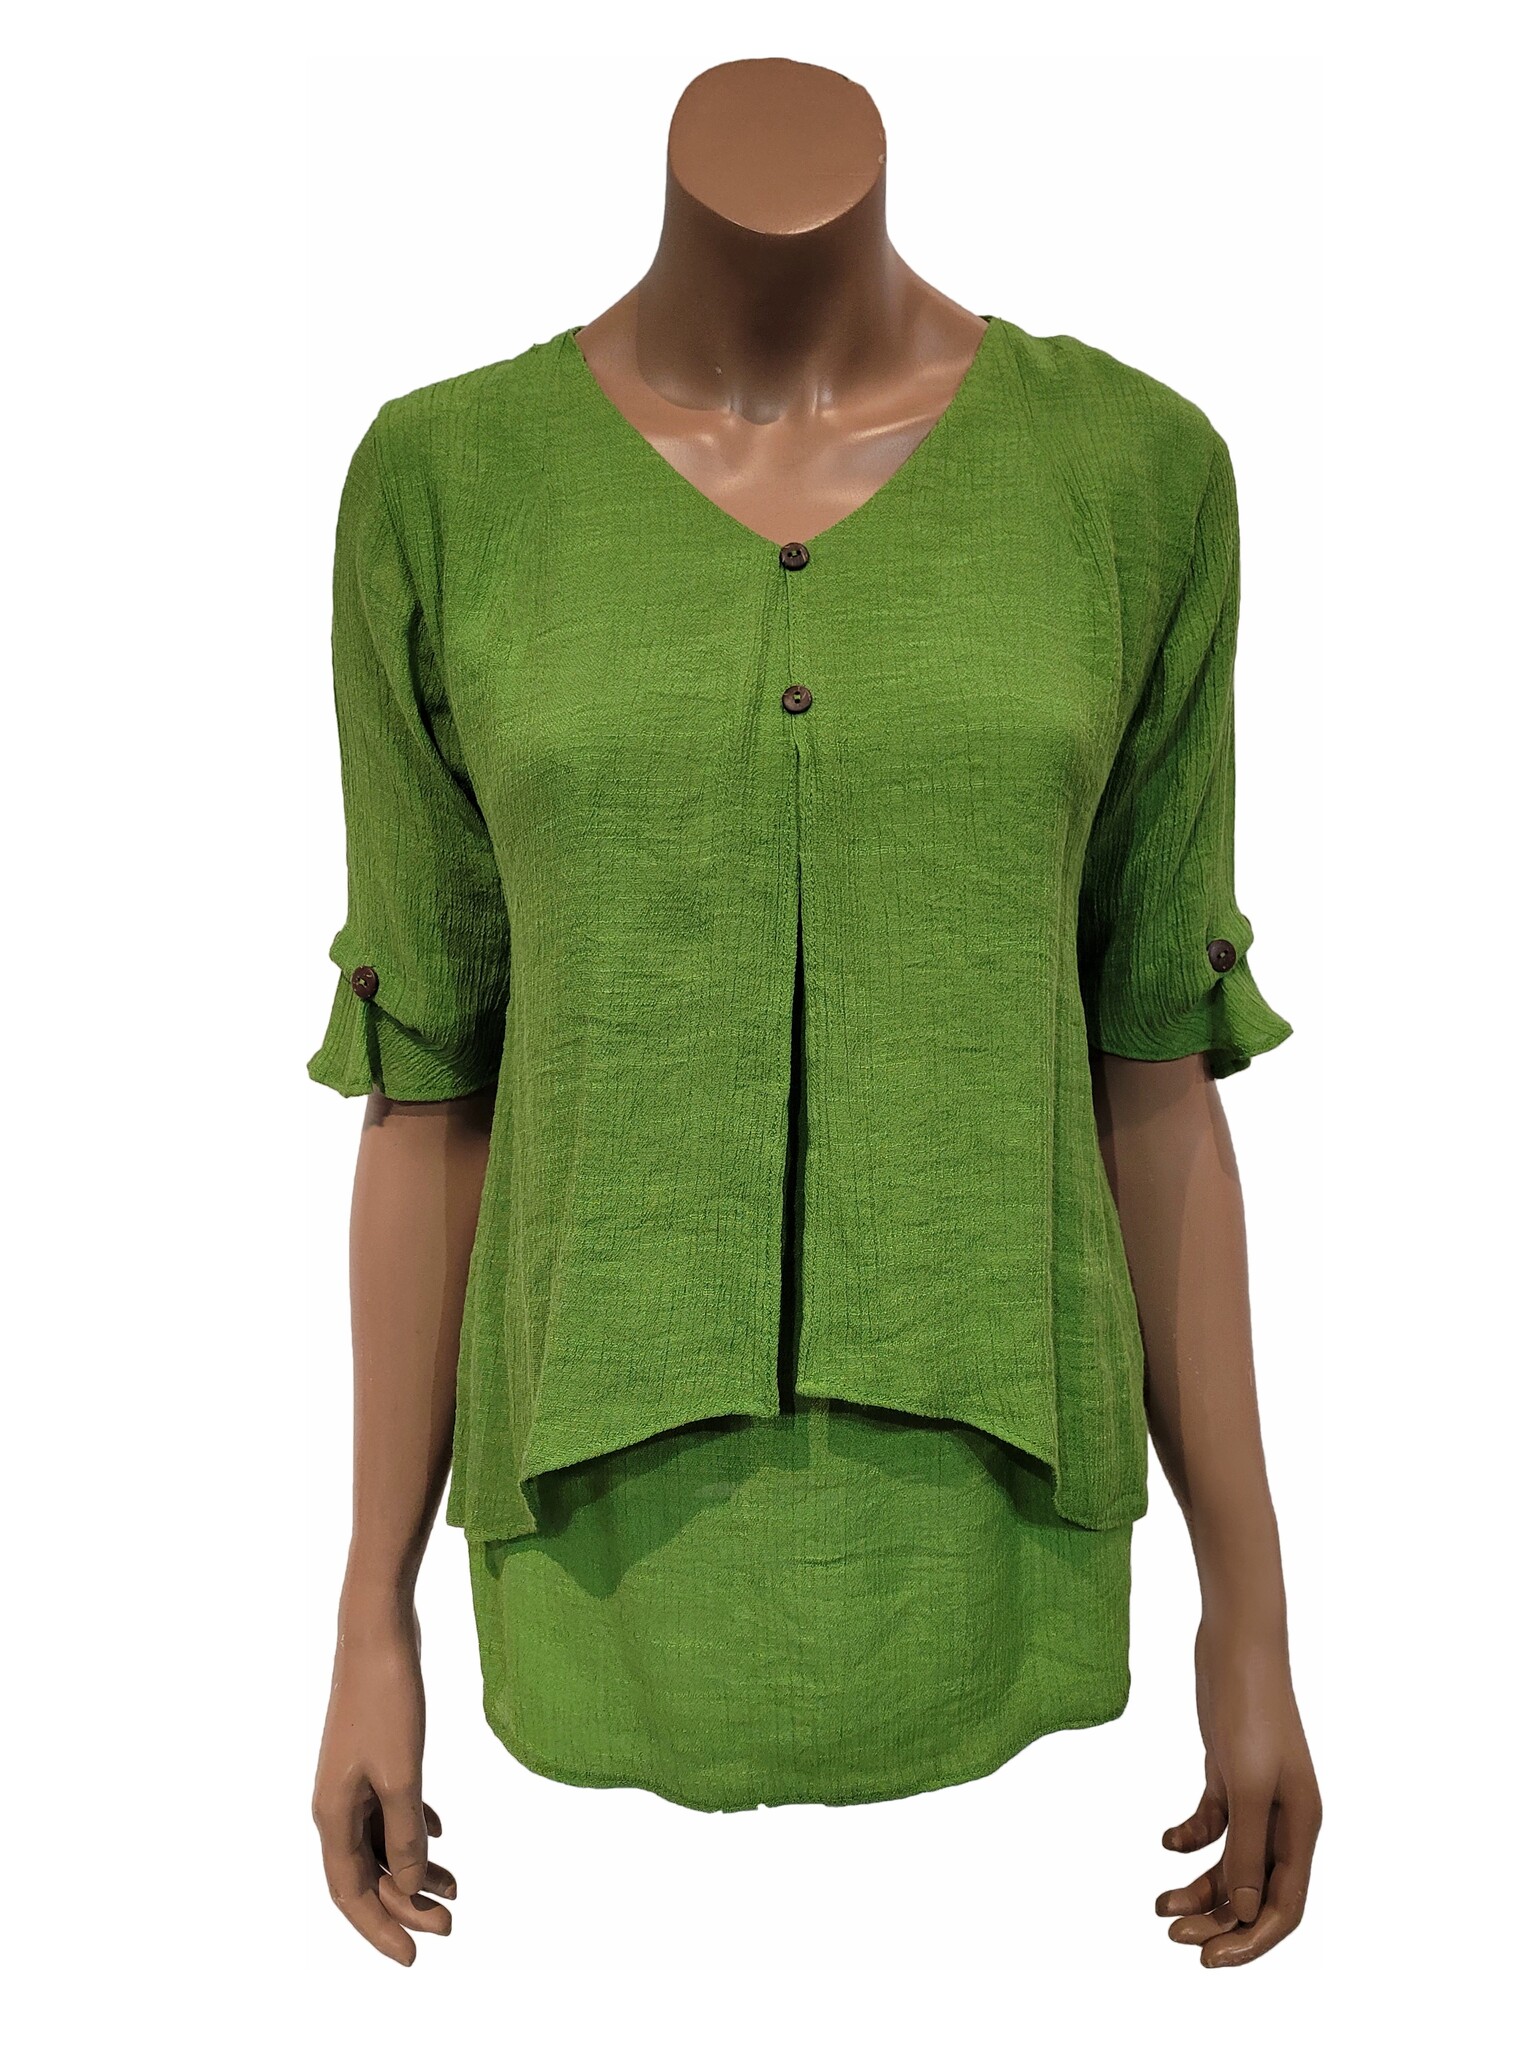 Shirt With 2 Hanging Layers, Short Sleeves, Bamboo-Cotton-PA